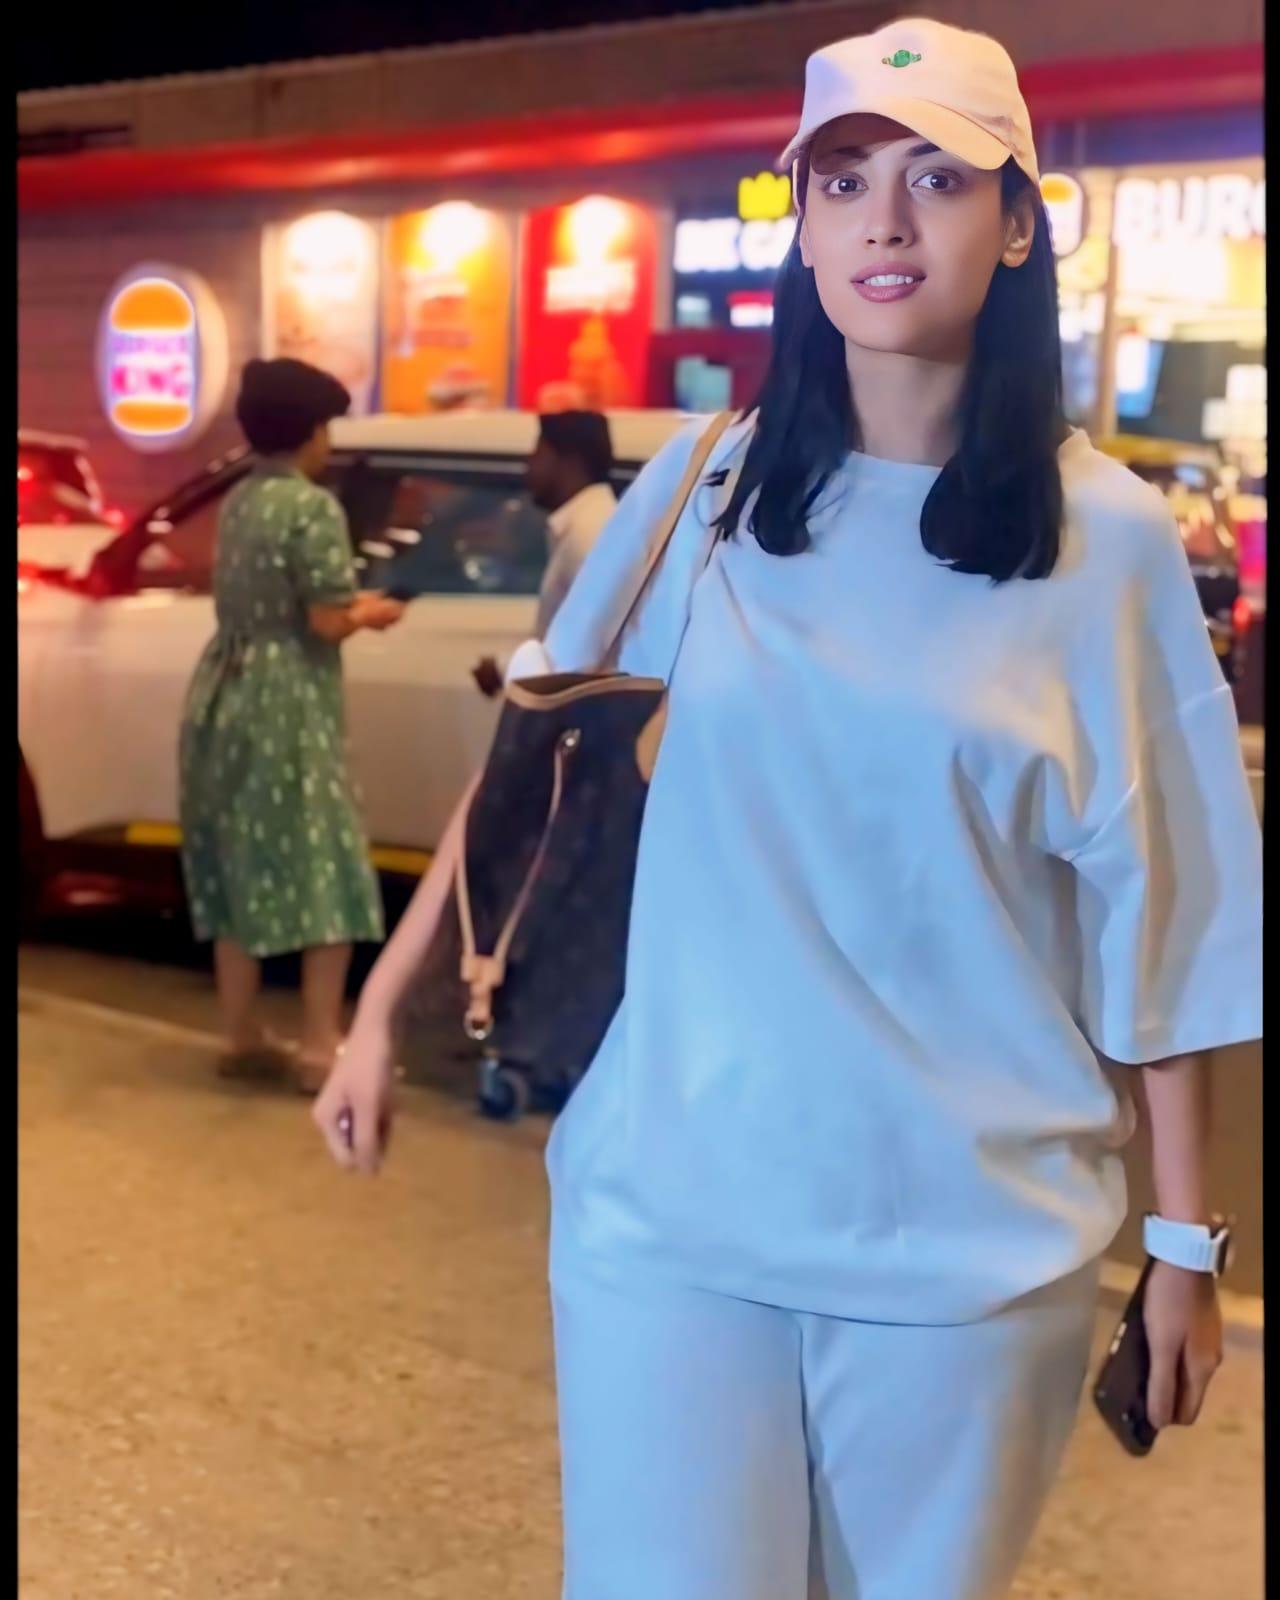 Aditi Sharma was also clicked at the airport as she jetted of for Rohit Shetty's reality show